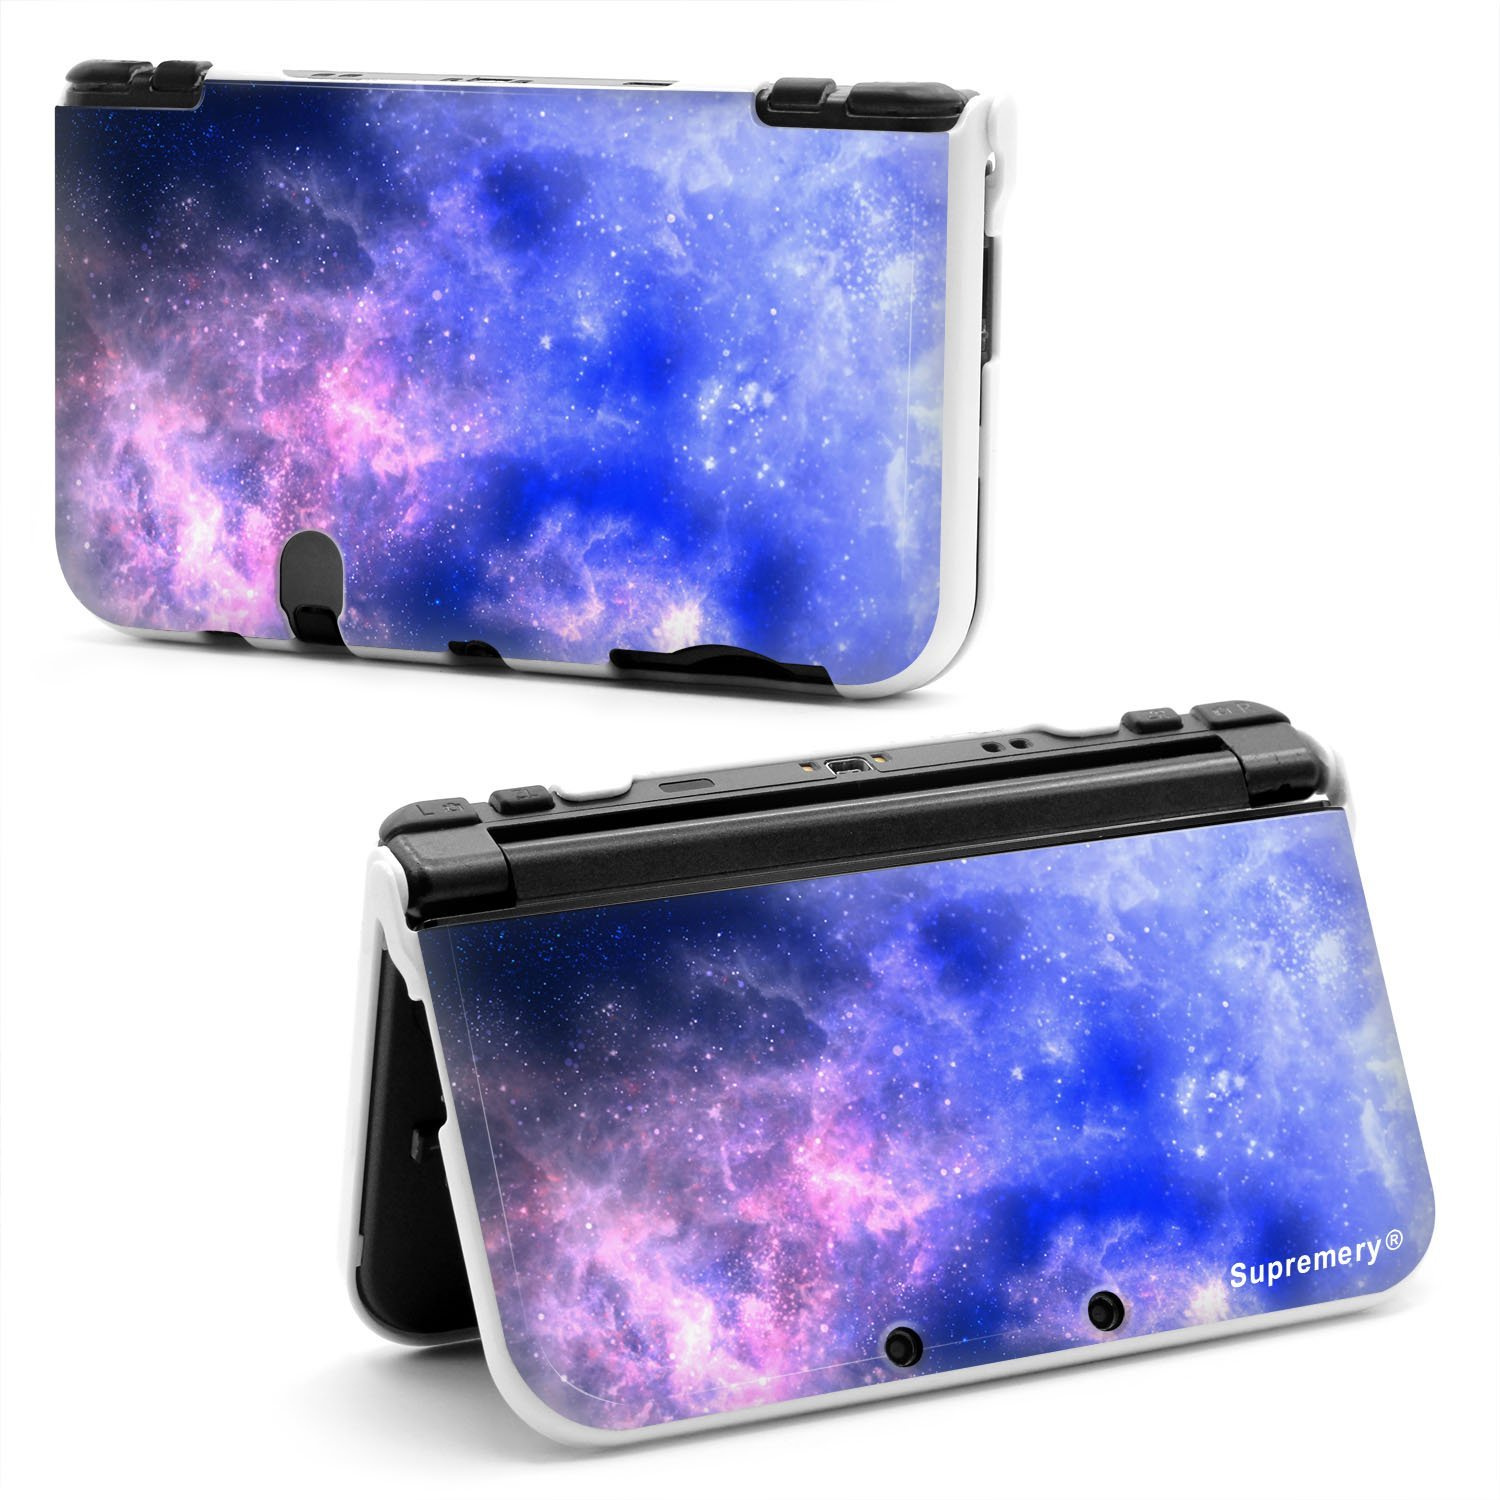 Random Spot The Difference Between The New Galaxy Style New 3ds Xl And A Third Party Accessory Nintendo Life